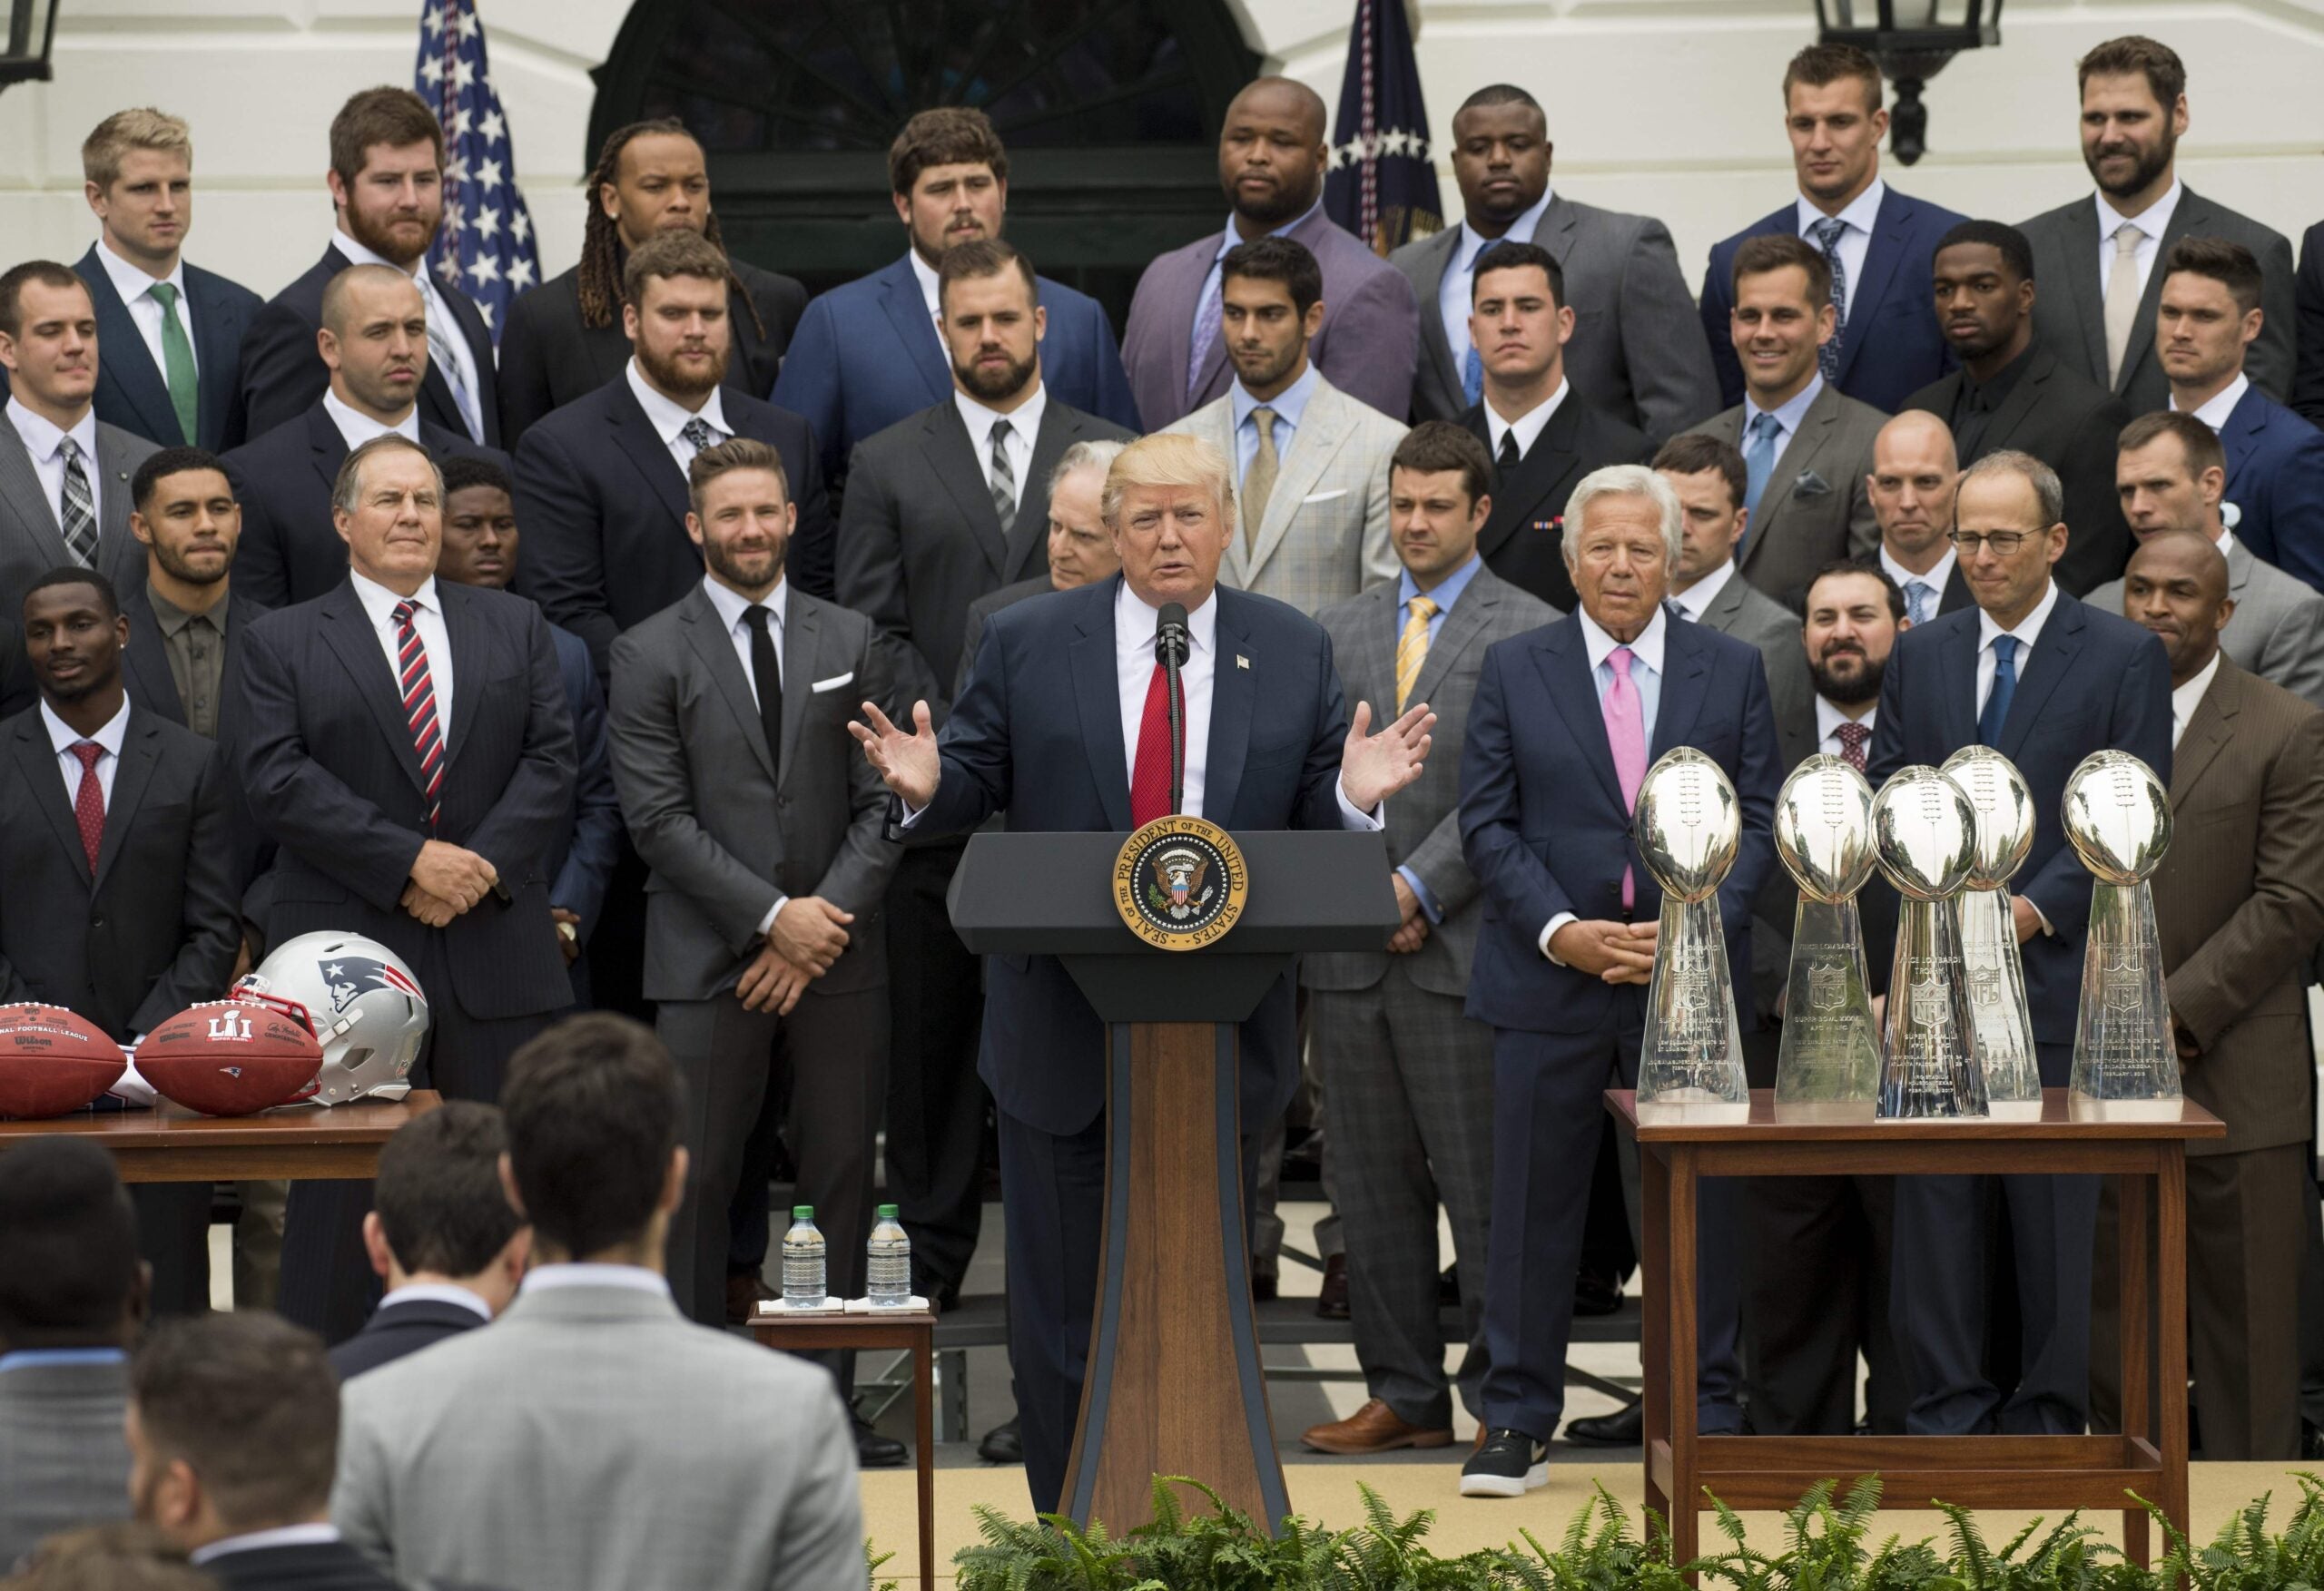 Two New England Patriots say they will refuse Trump's White House invite, New England Patriots